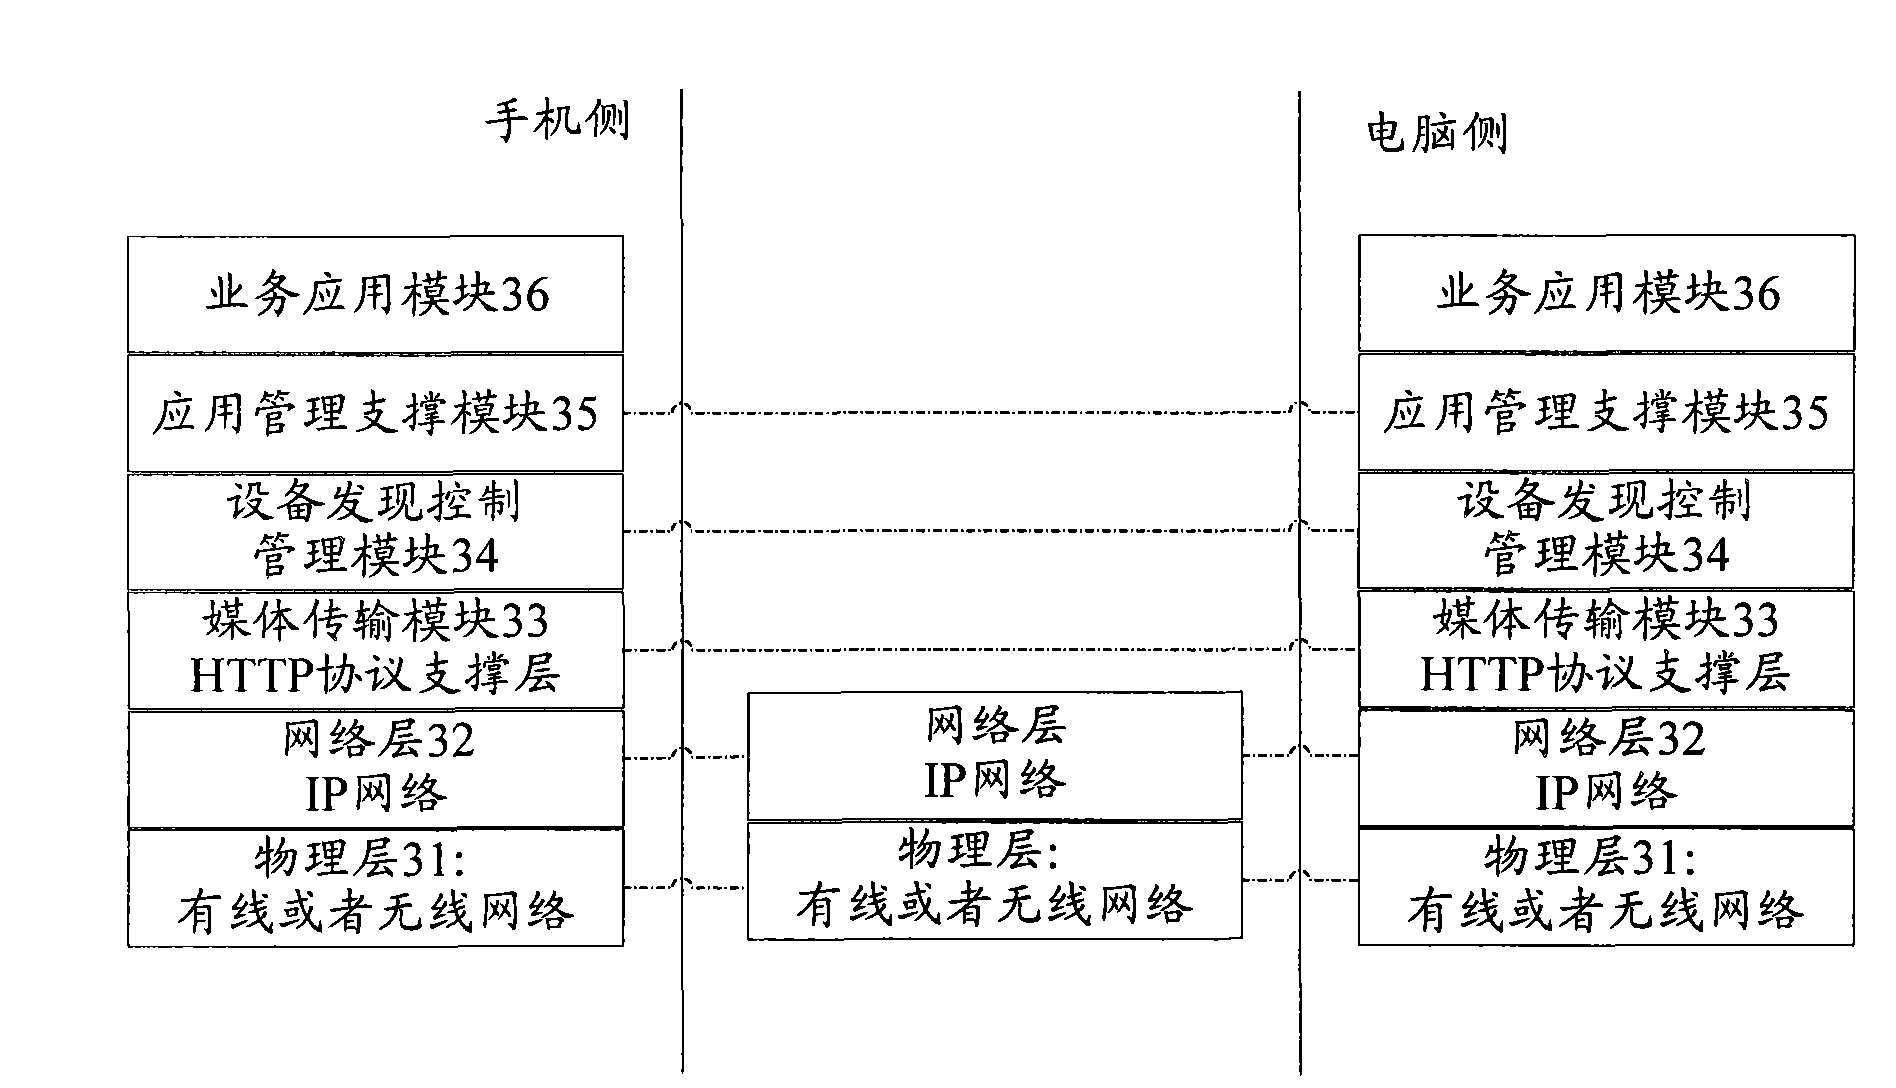 Local area network system for realizing streaming media switch among peer-to-peer devices and realization method thereof